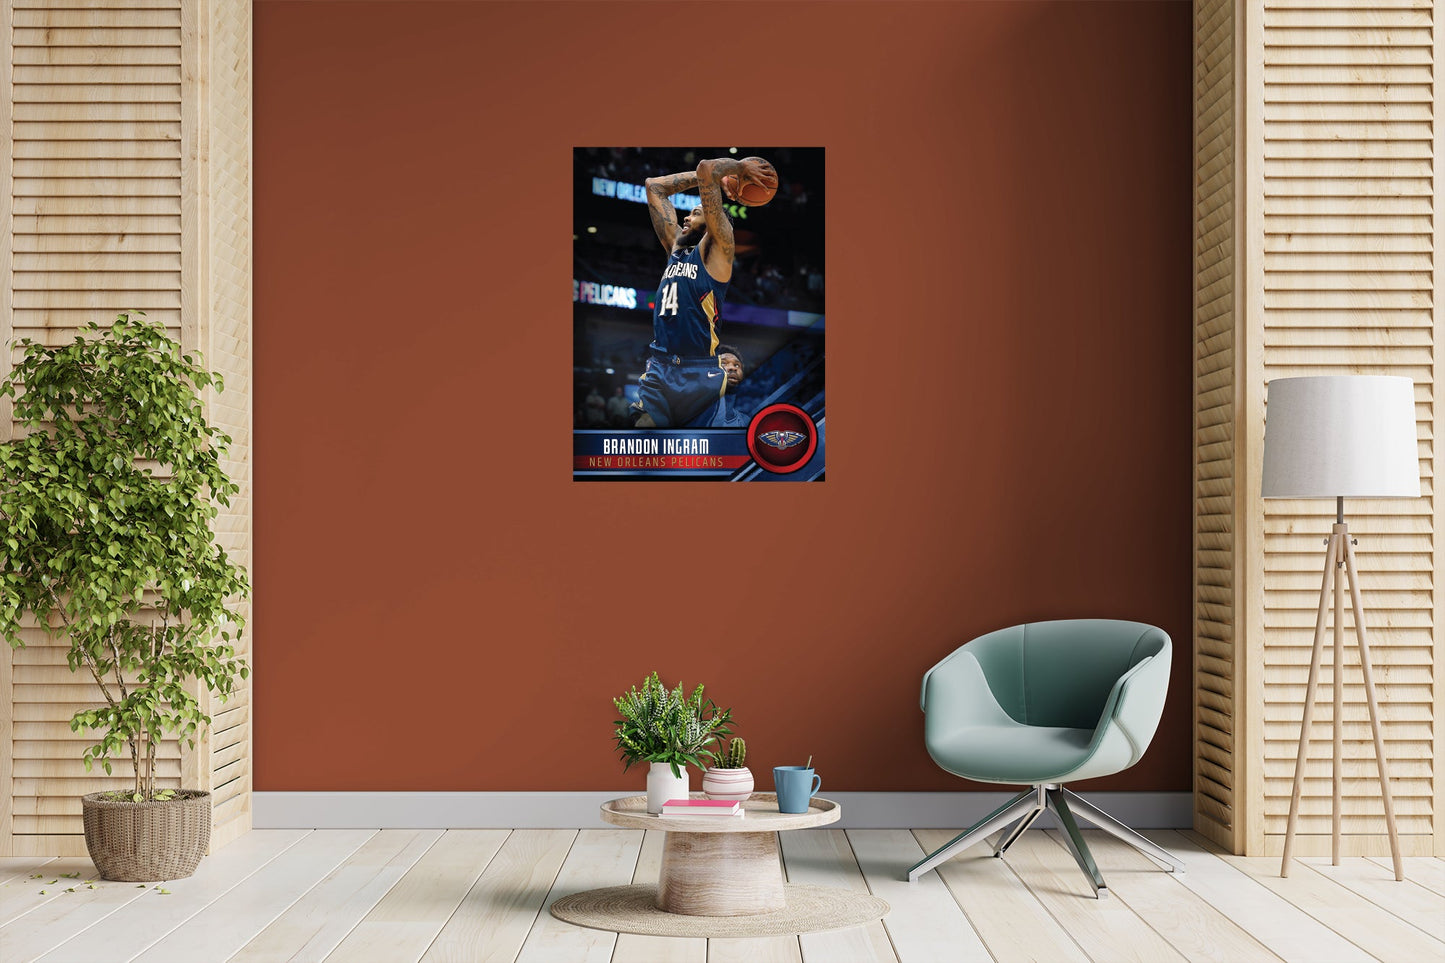 New Orleans Pelicans: Brandon Ingram Poster - Officially Licensed NBA Removable Adhesive Decal